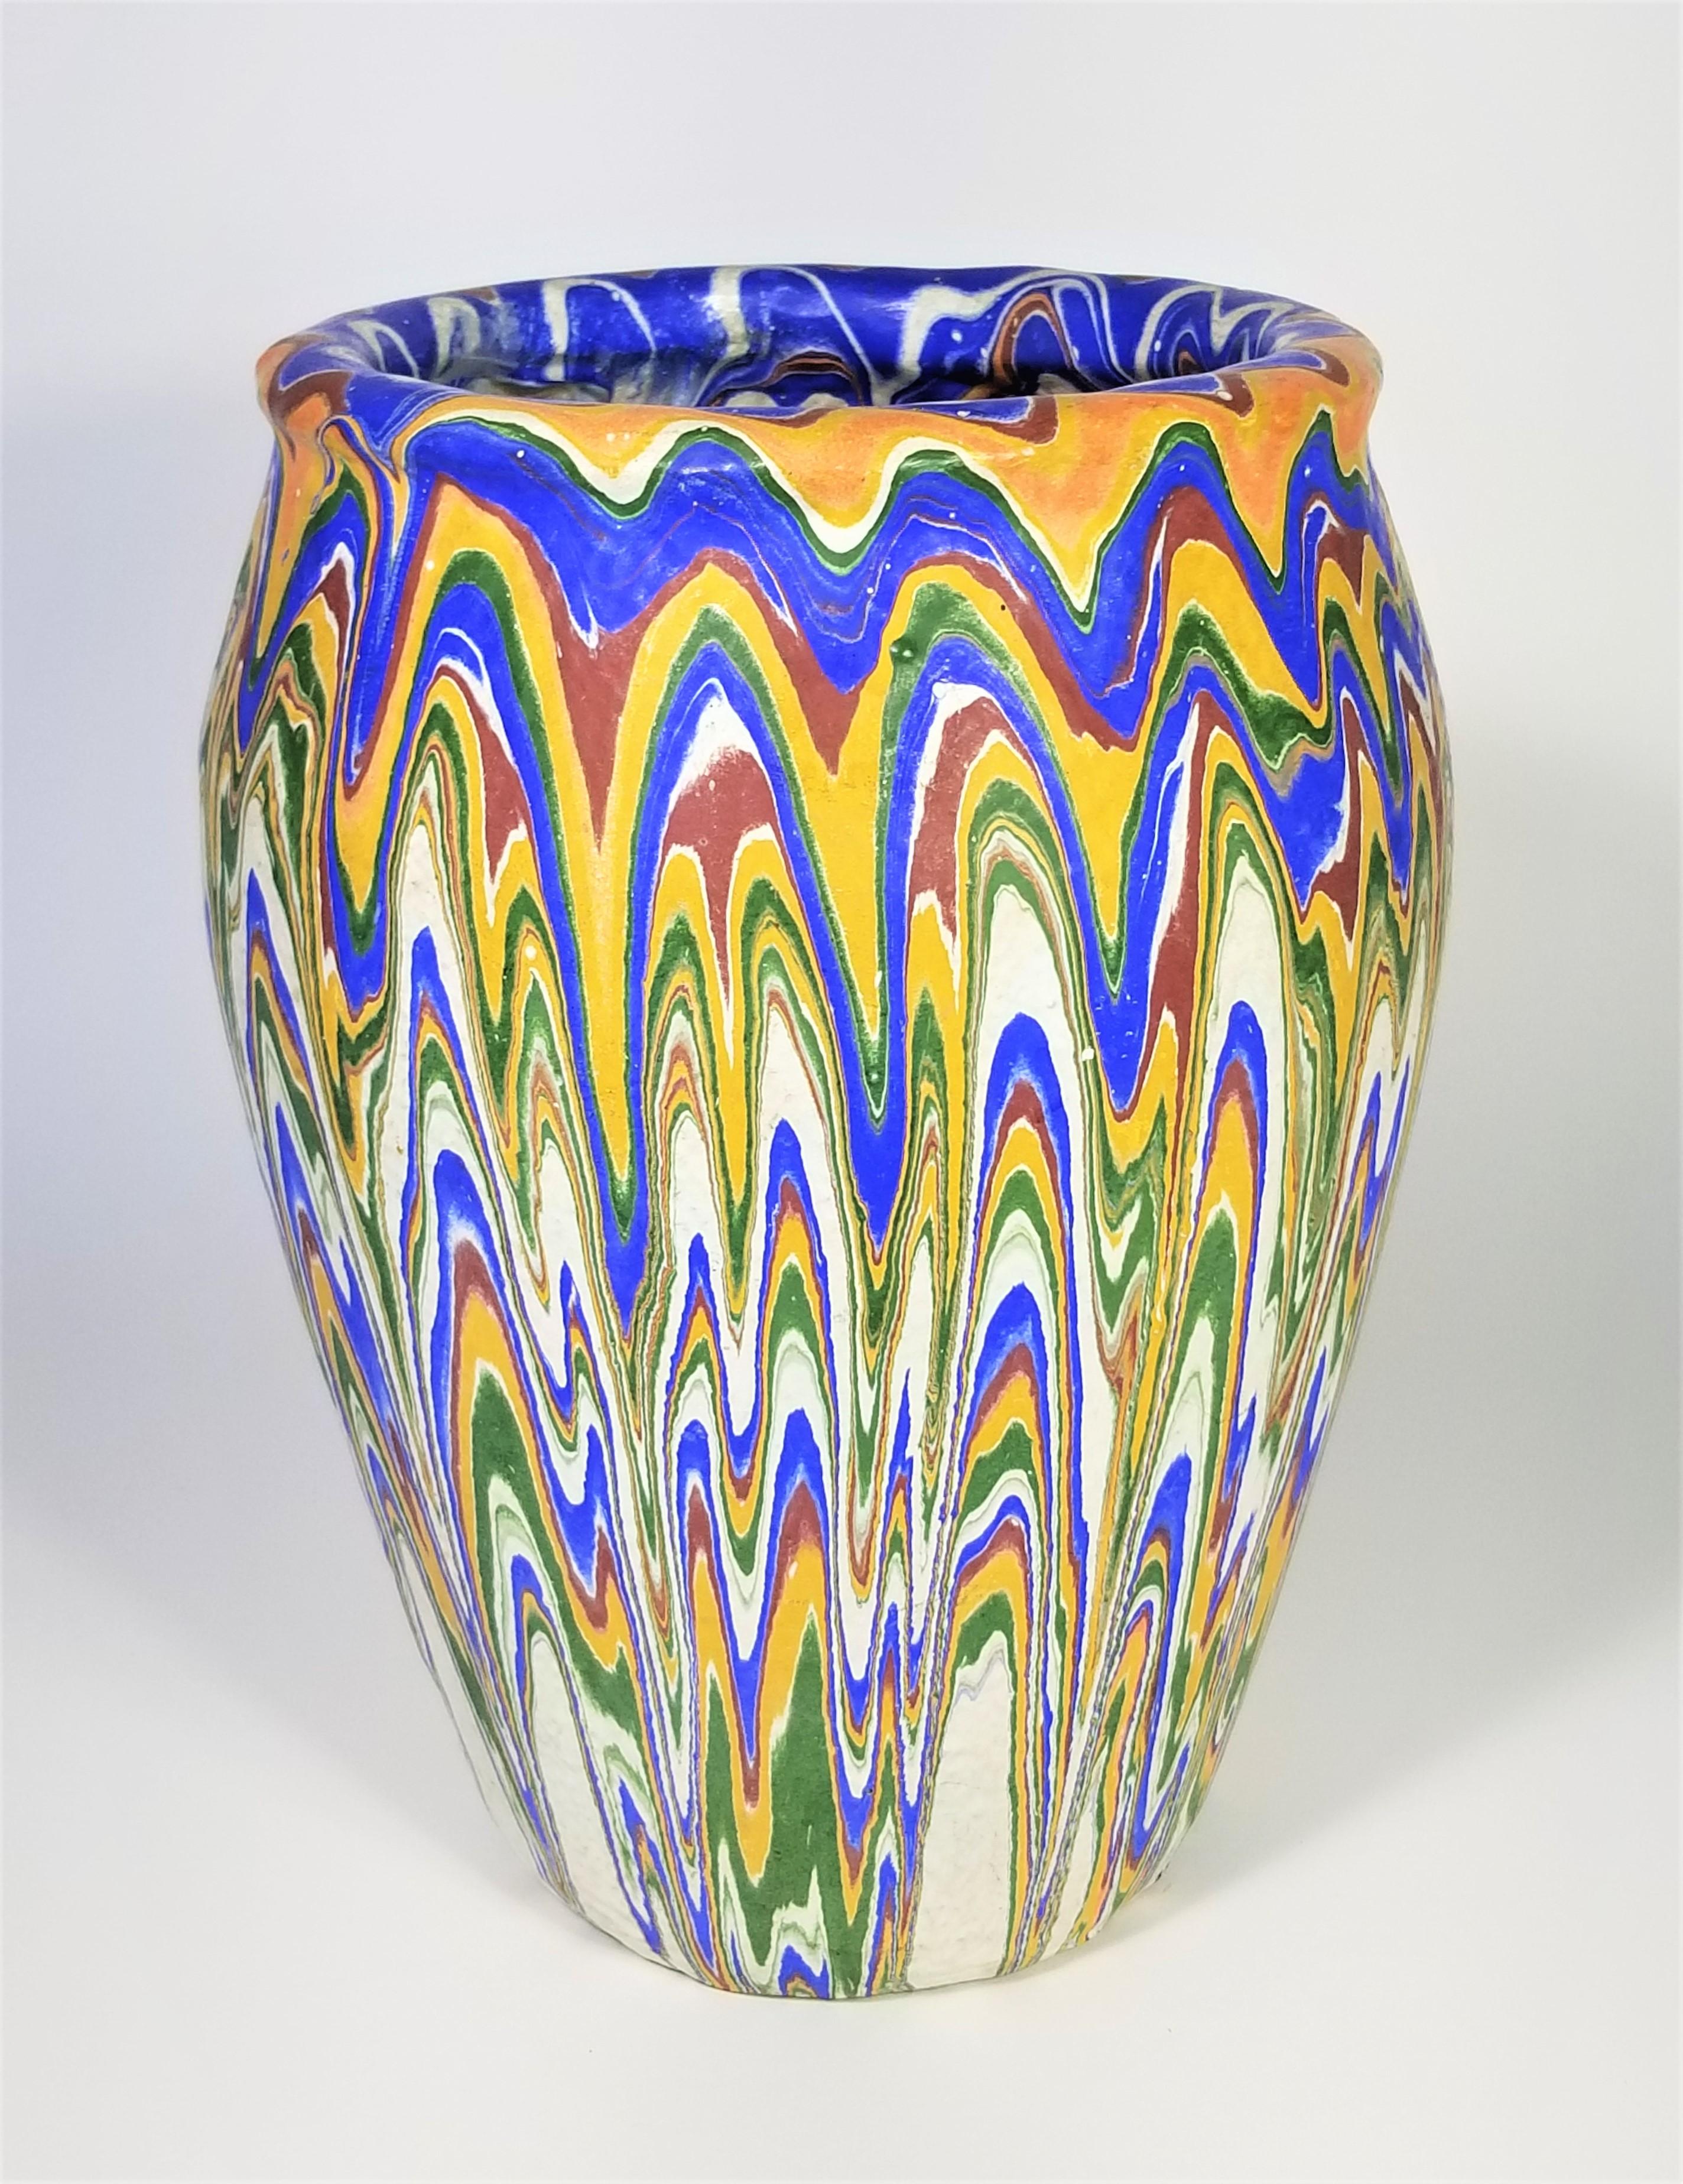 Rare vintage 1930s ozark roadside drip pottery. Vase or pot. Hand painted multicolored. Blue, yellow, red and green.